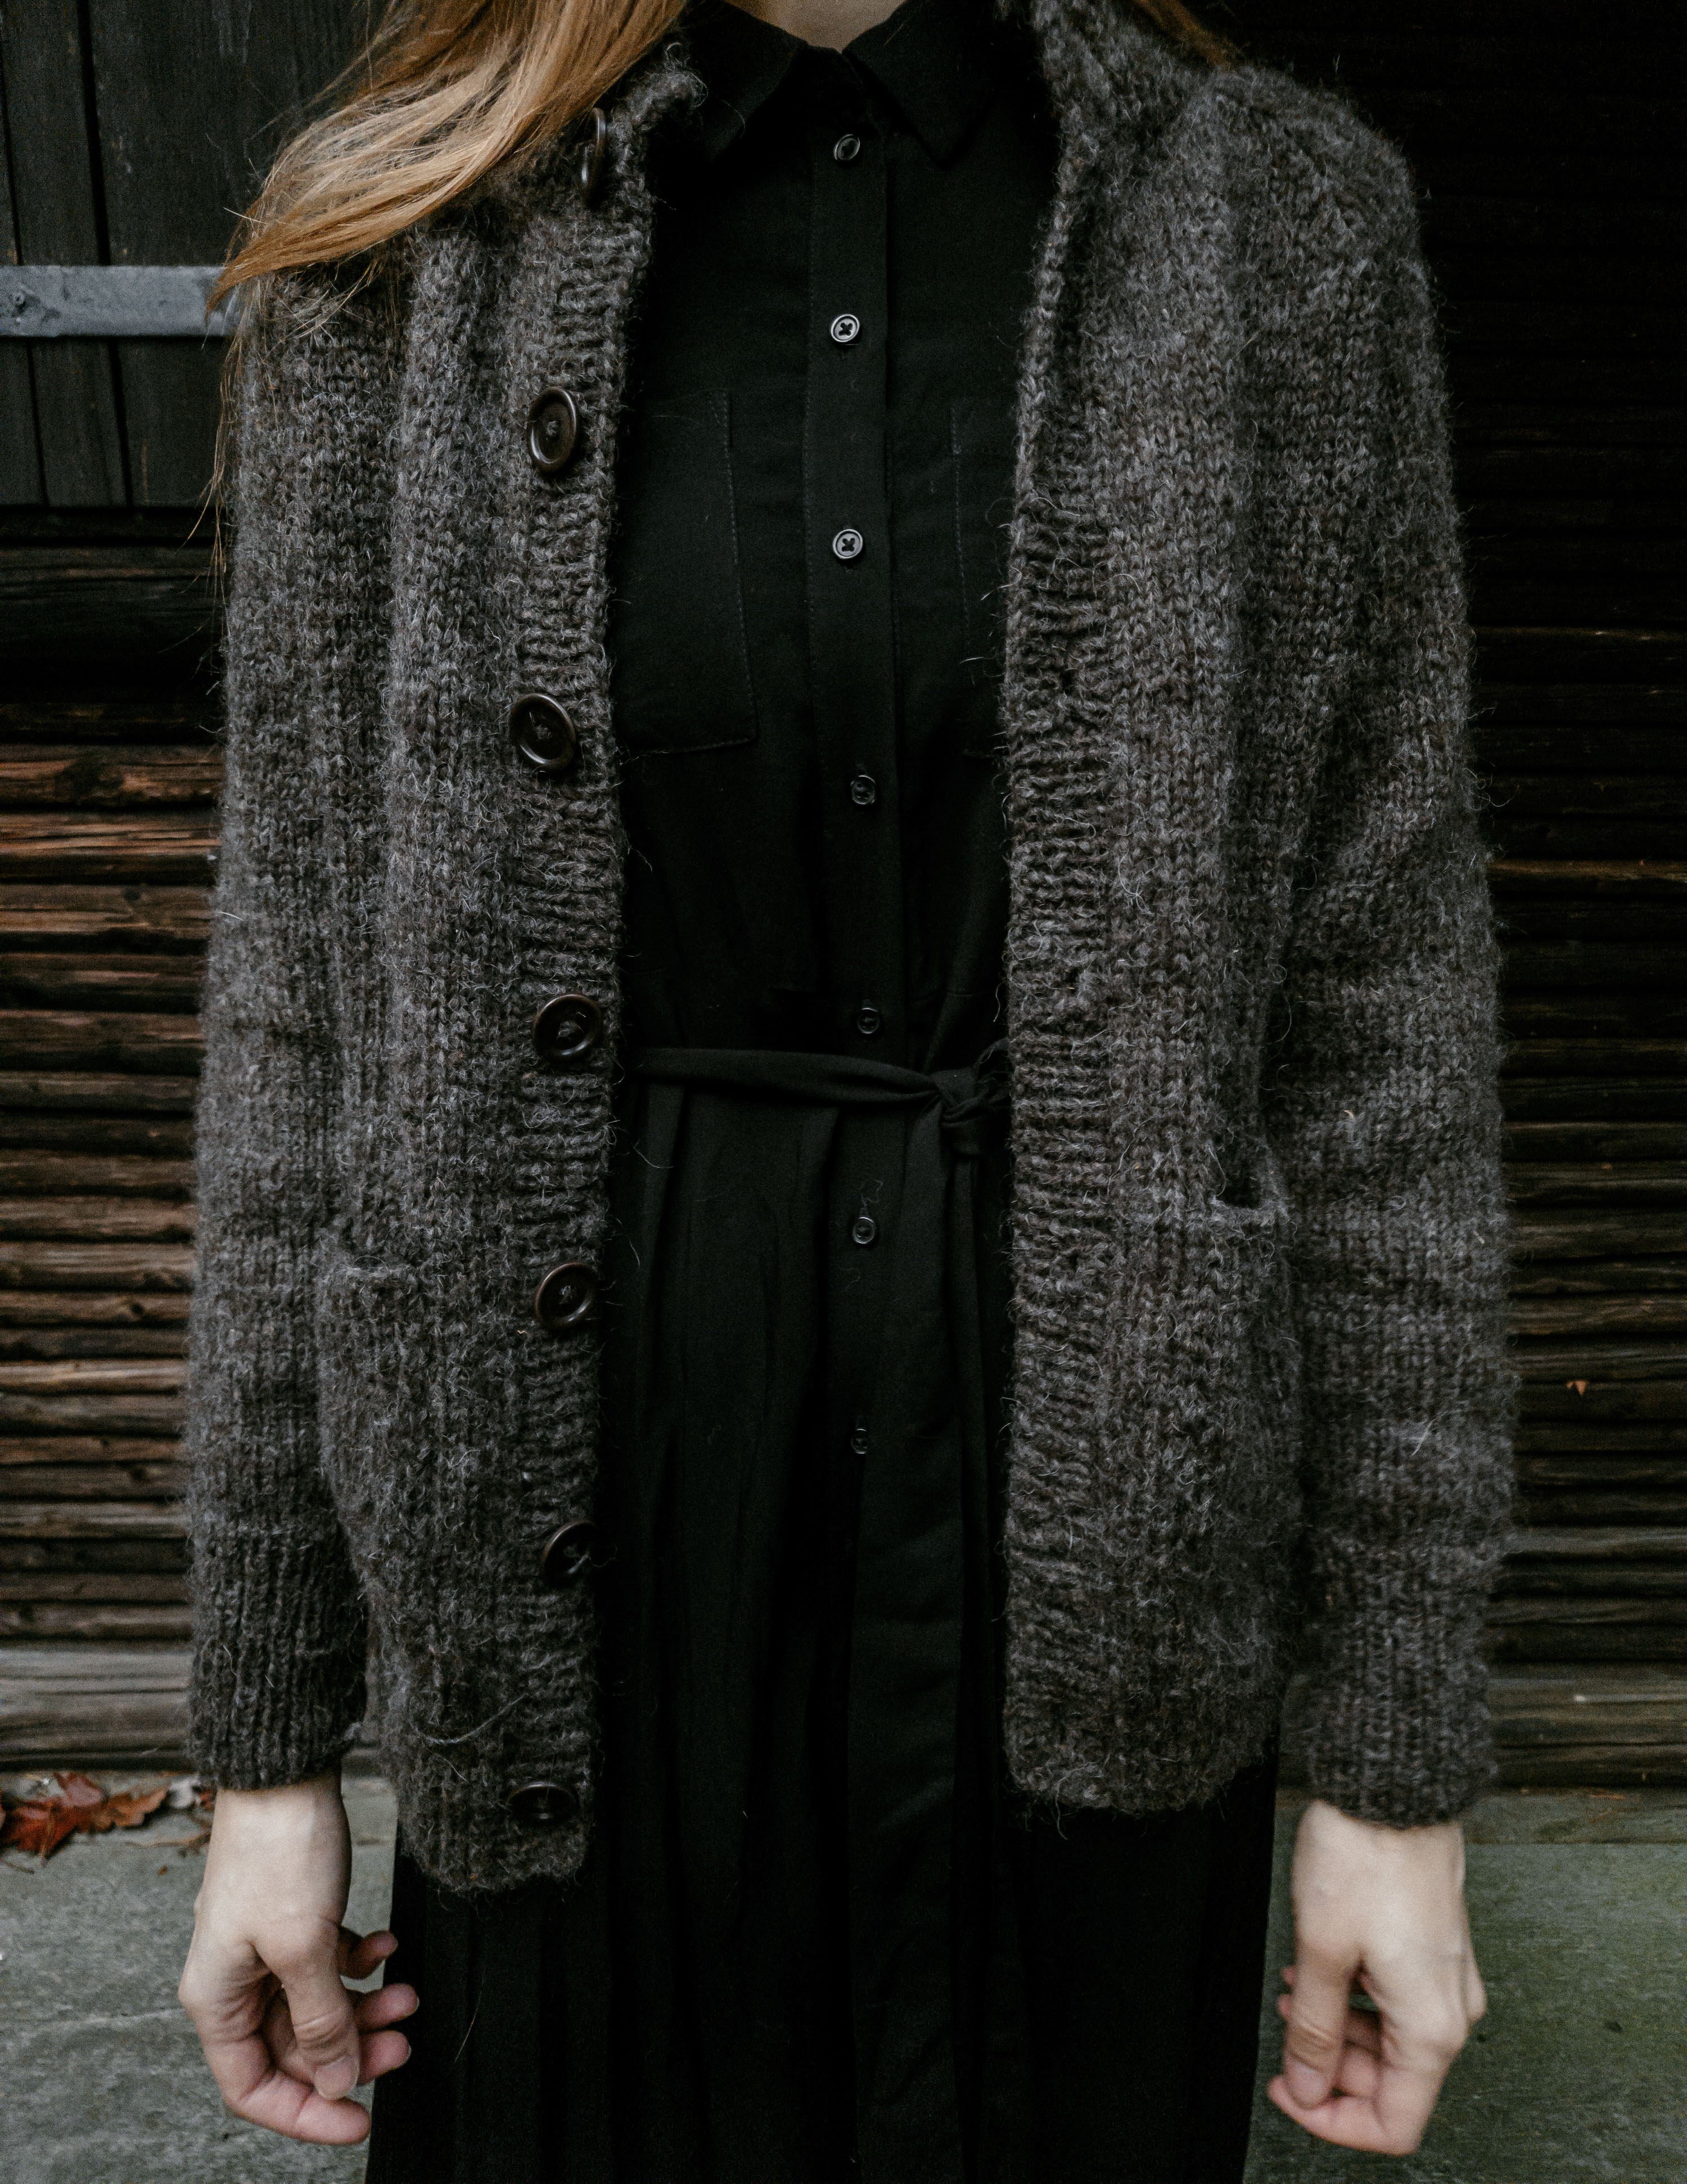 Image of knitwear designer Lív Ulven wearing her handknit rustic dark grey Lo·ki Cardigan, crafted with unspun Nutiden yarn. The background features an old, dark brown wooden cabin wall.